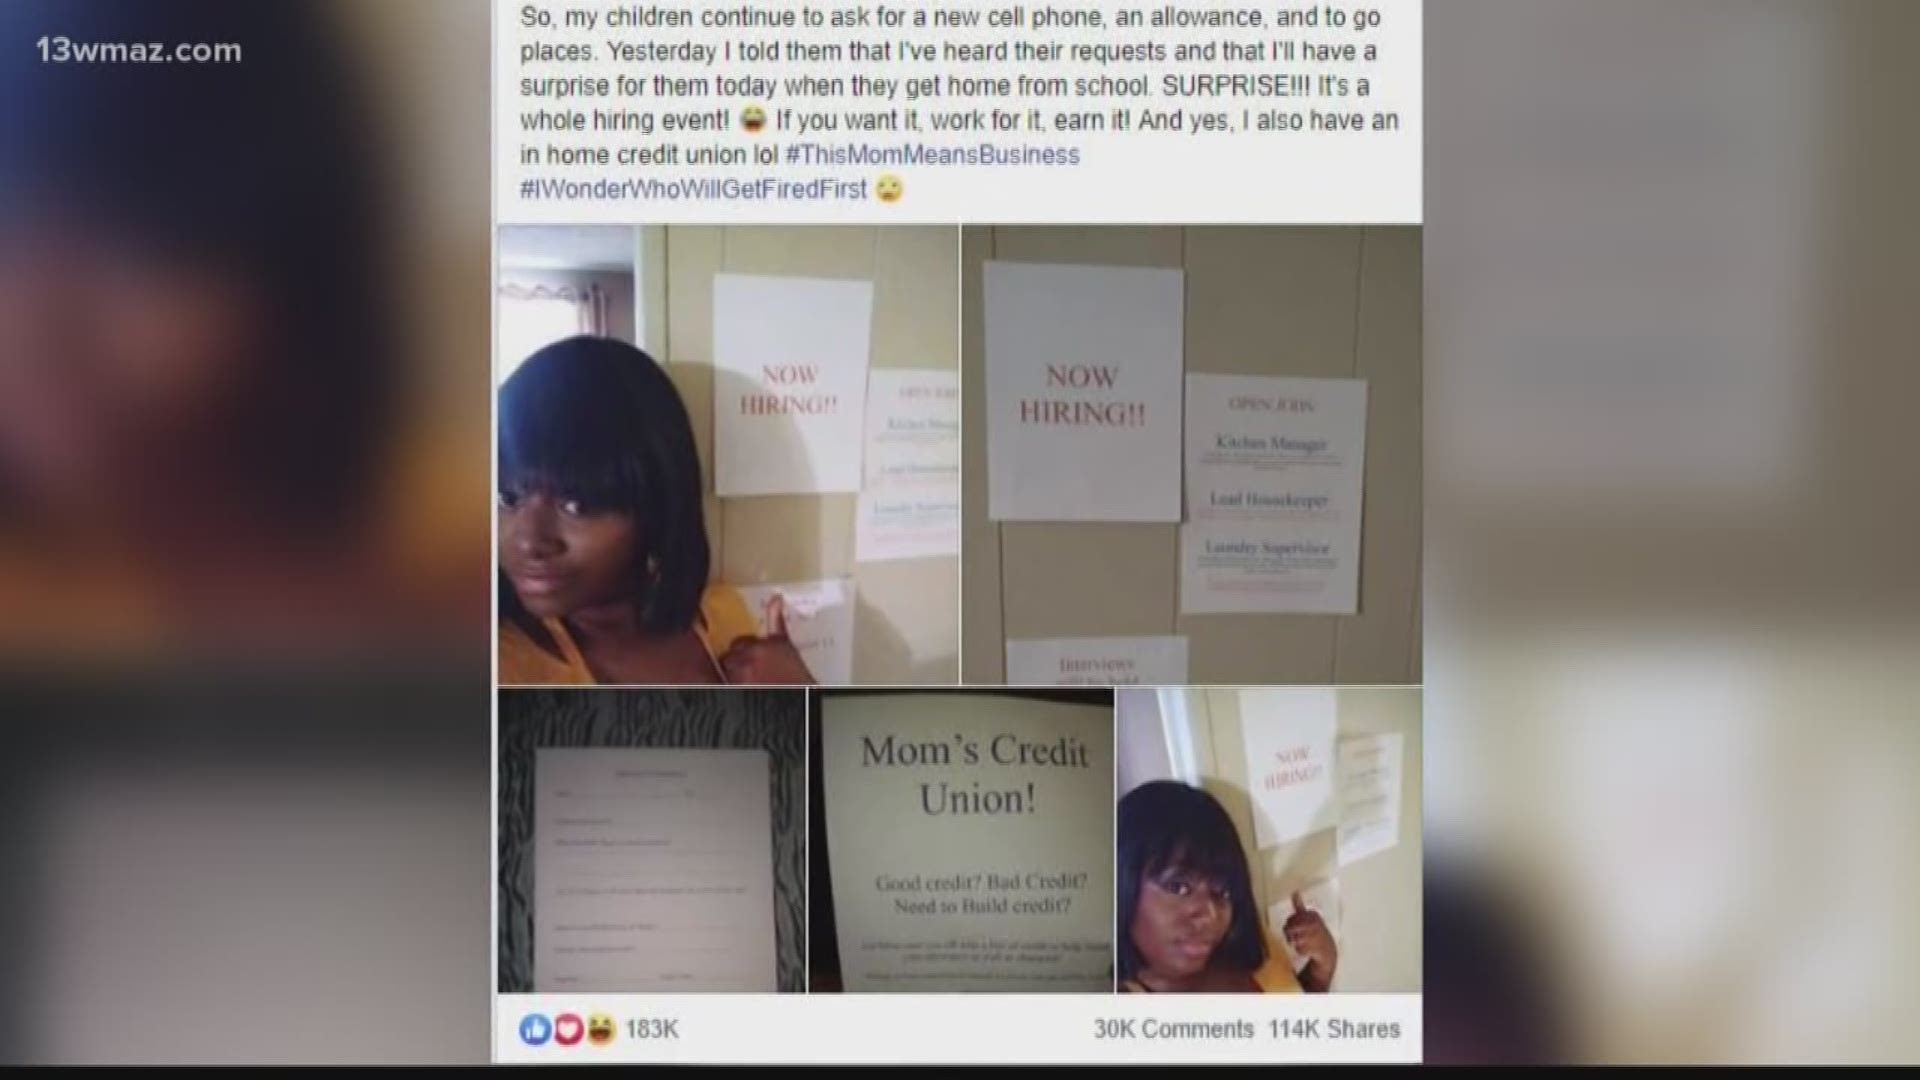 A Dublin mom's Facebook post is trending for teaching her children how to handle their money. It got over 150,000 likes, more than 100,000 shares, and almost 30,000 comments. Shaketha McGregor says she has had her fair share of tough times, and she wanted to teach her kids the value of money saving and jobs.